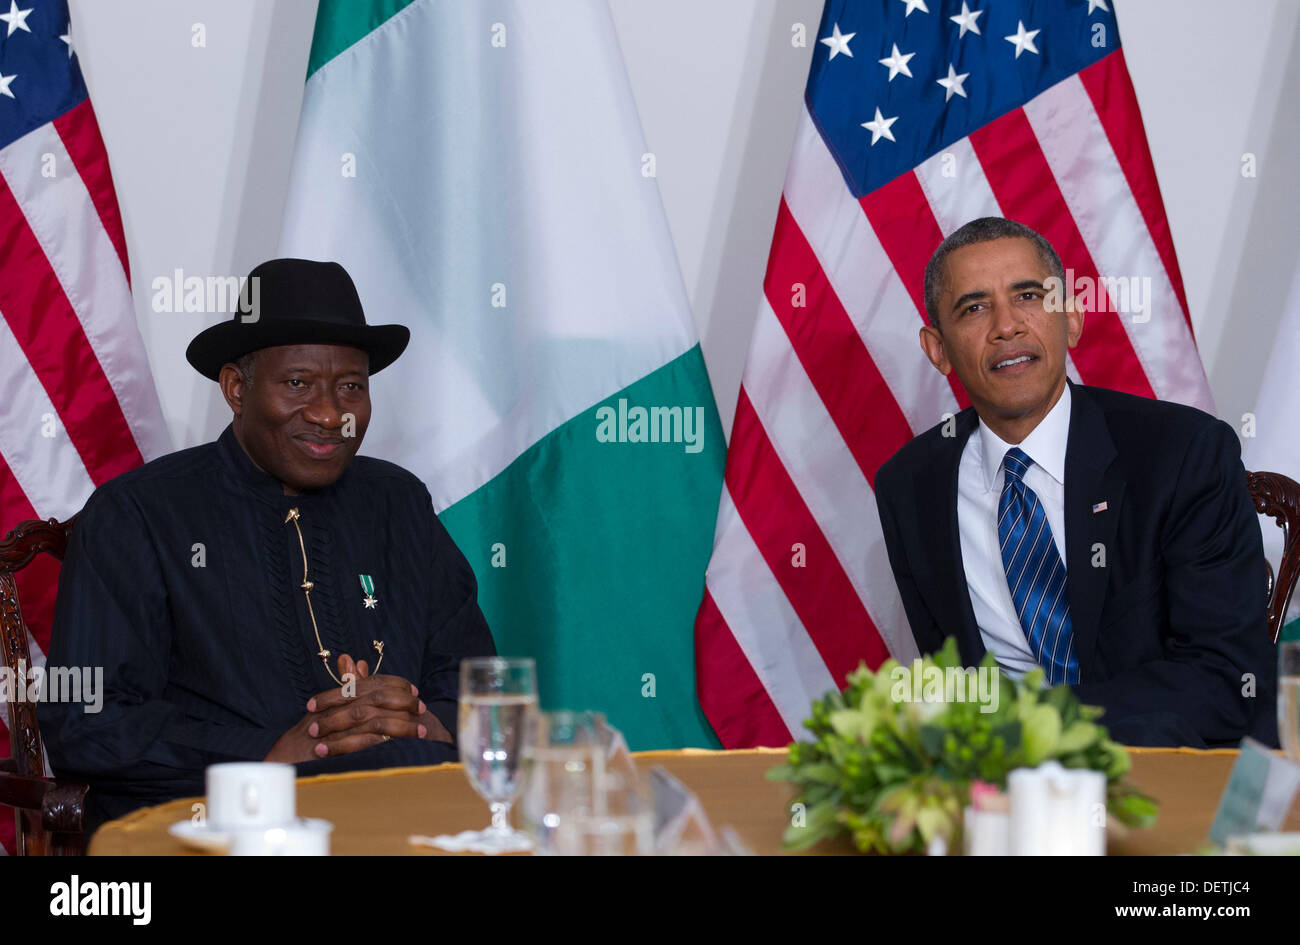 New York, New York. 23rd Sep, 2013. President Goodluck Jonathan of Nigeria and United States President Barack Obama meet in New York, New York, on Monday, September 23, 2013. Credit: Jin Lee / Pool via CNP/dpa/Alamy Live News Stock Photo